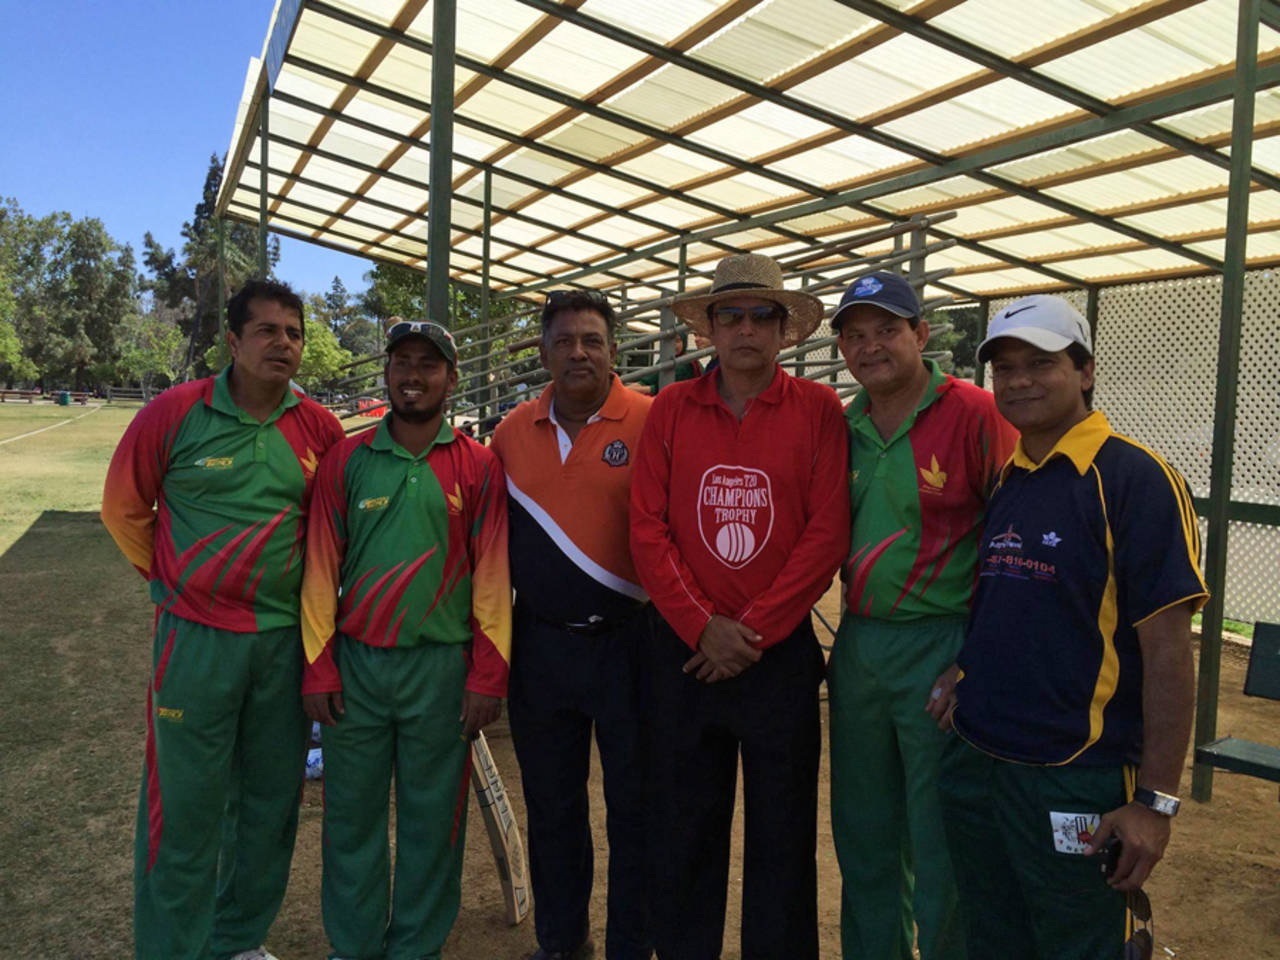 Nadir Shah (third from right) stood in the LA T20 Championship, which drew attention for the appearance of Mohammad Ashraful (second from left)